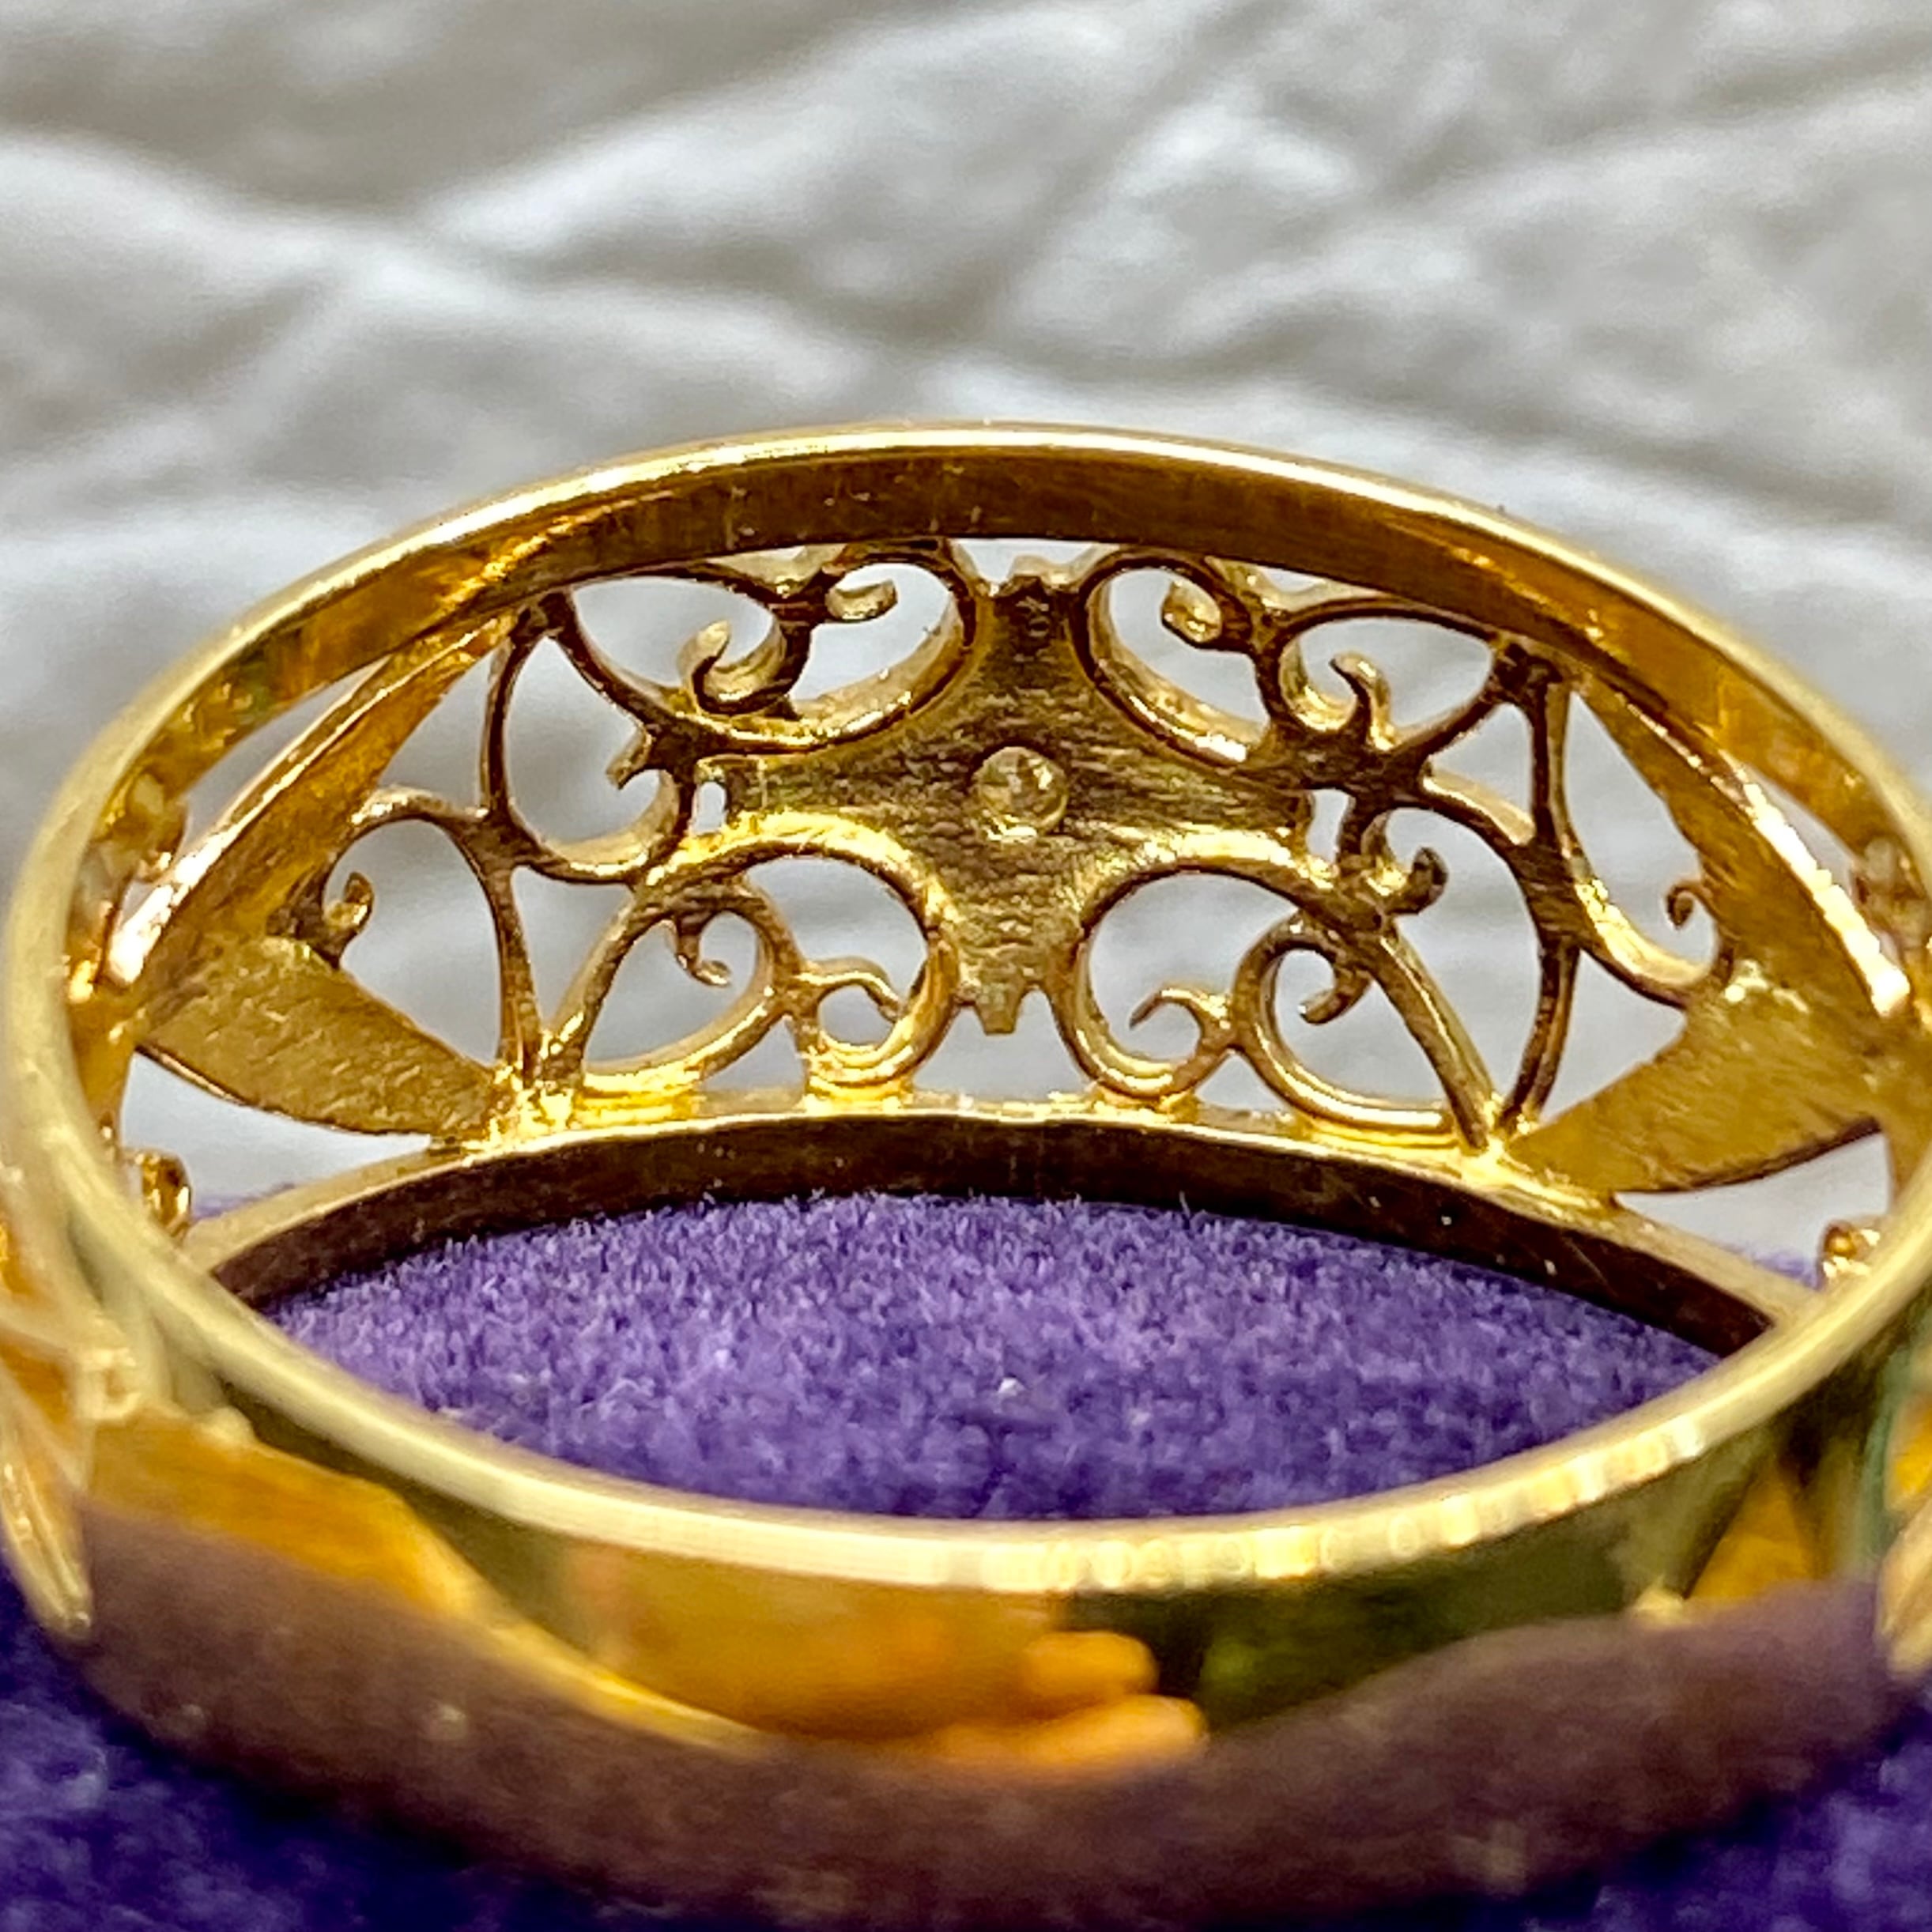 ～Japanese traditional ring～昭和レトロリング レースのような透かし☆和製フィリグリーリング☆ | デイジーリング  アンティークジュエリー★DaisyRing★ powered by BASE